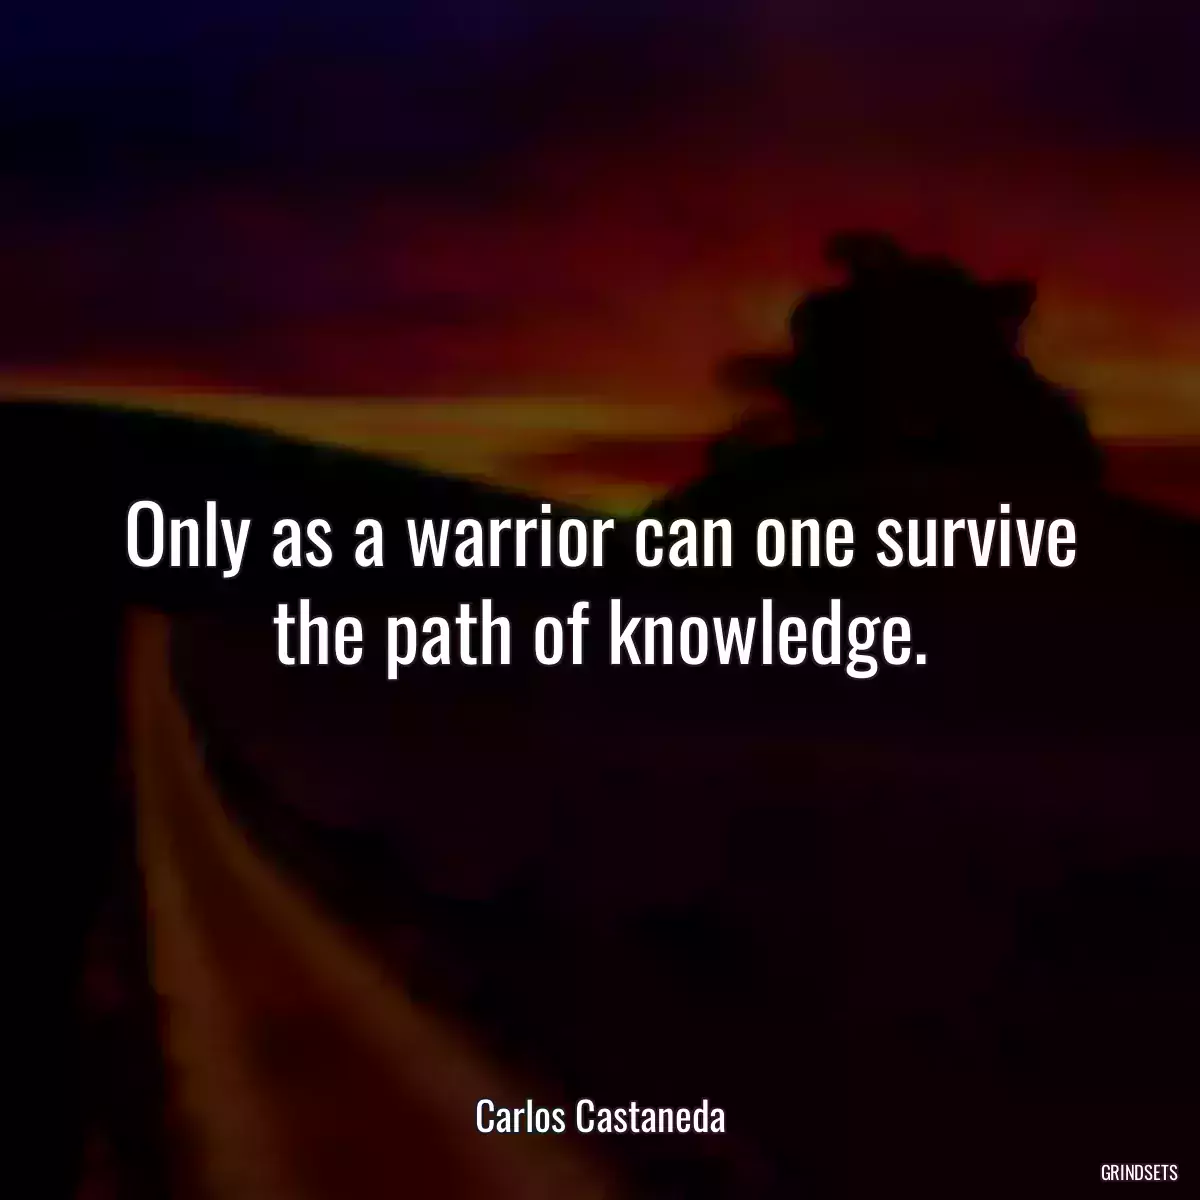 Only as a warrior can one survive the path of knowledge.